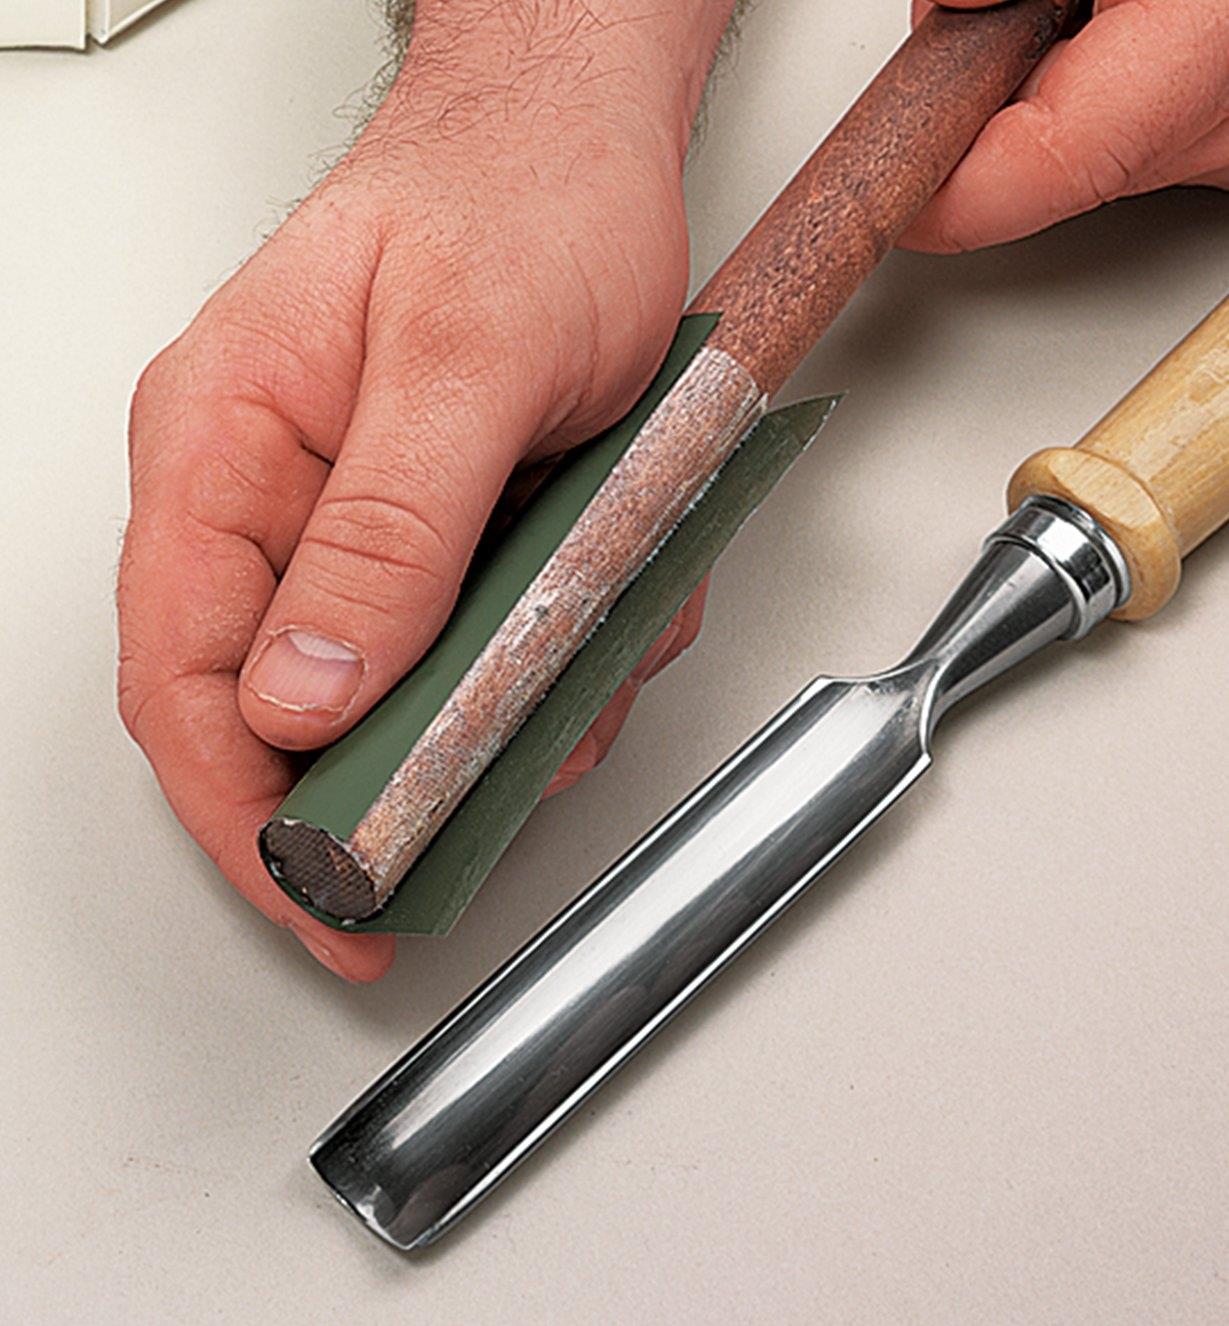 Micro-abrasive film being applied to a sharpening fid using transfer tape